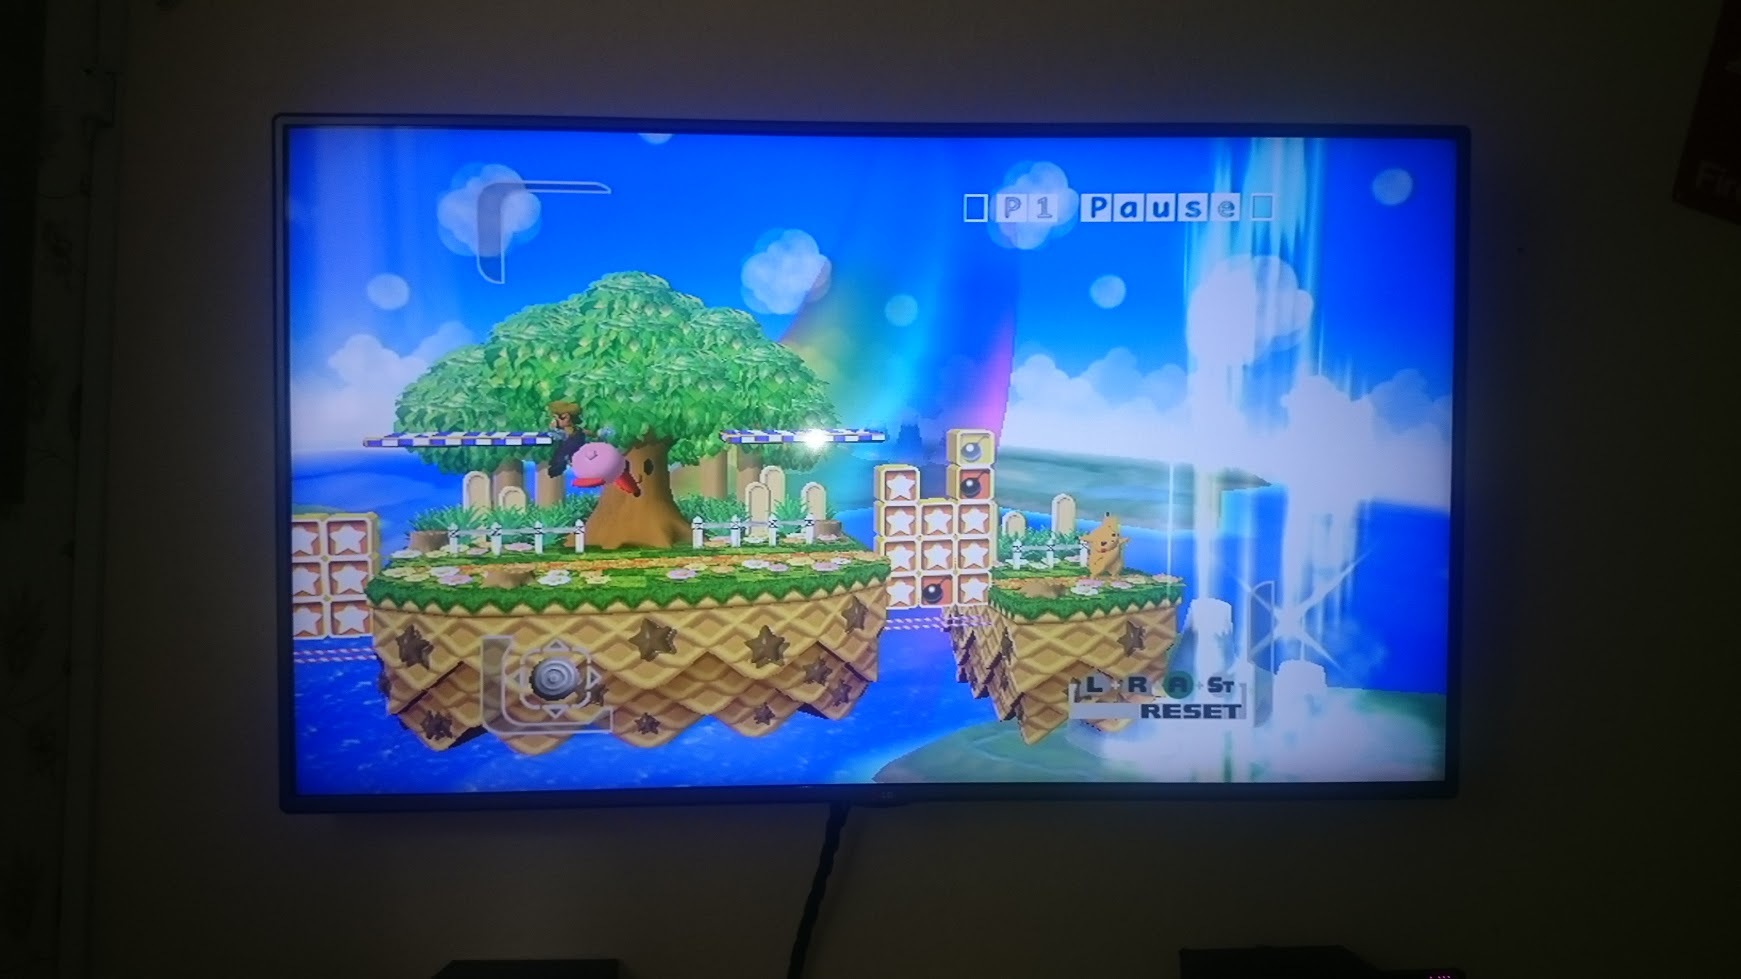 Play gamecube games on your wii u with nintendont gamecube